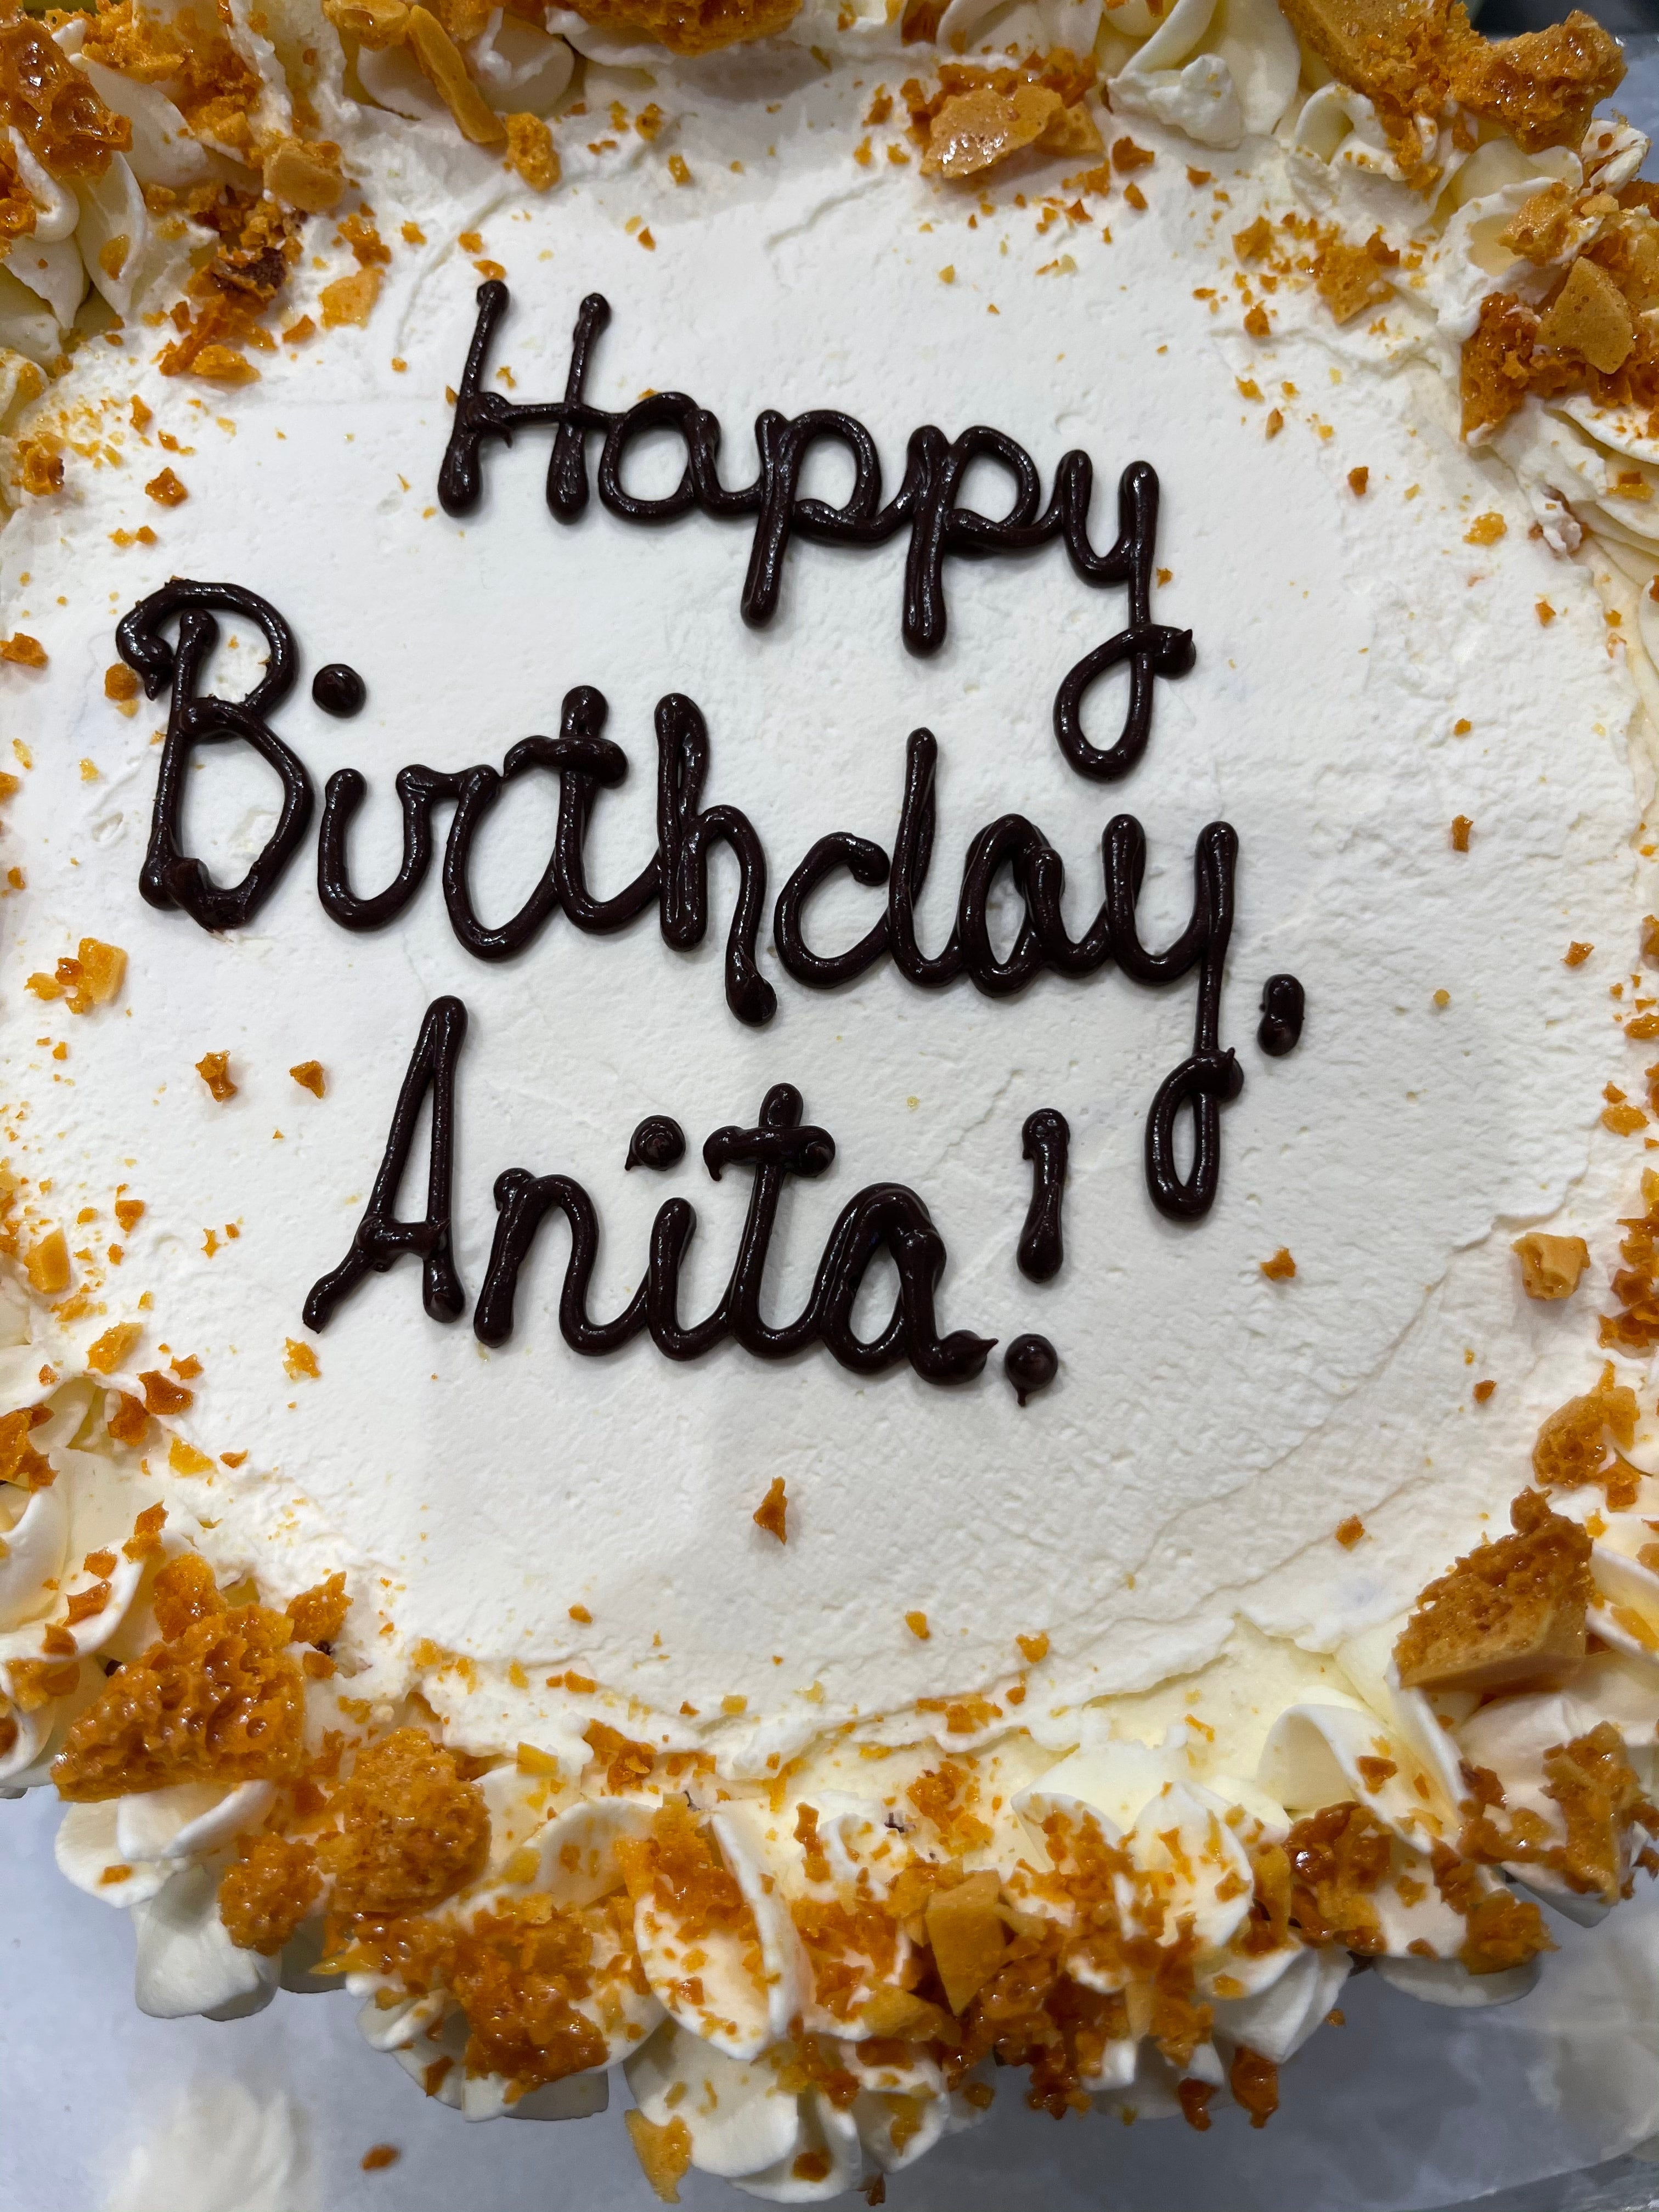 Happy Birthday Anita Wishes, song, cake,images for Anita - YouTube